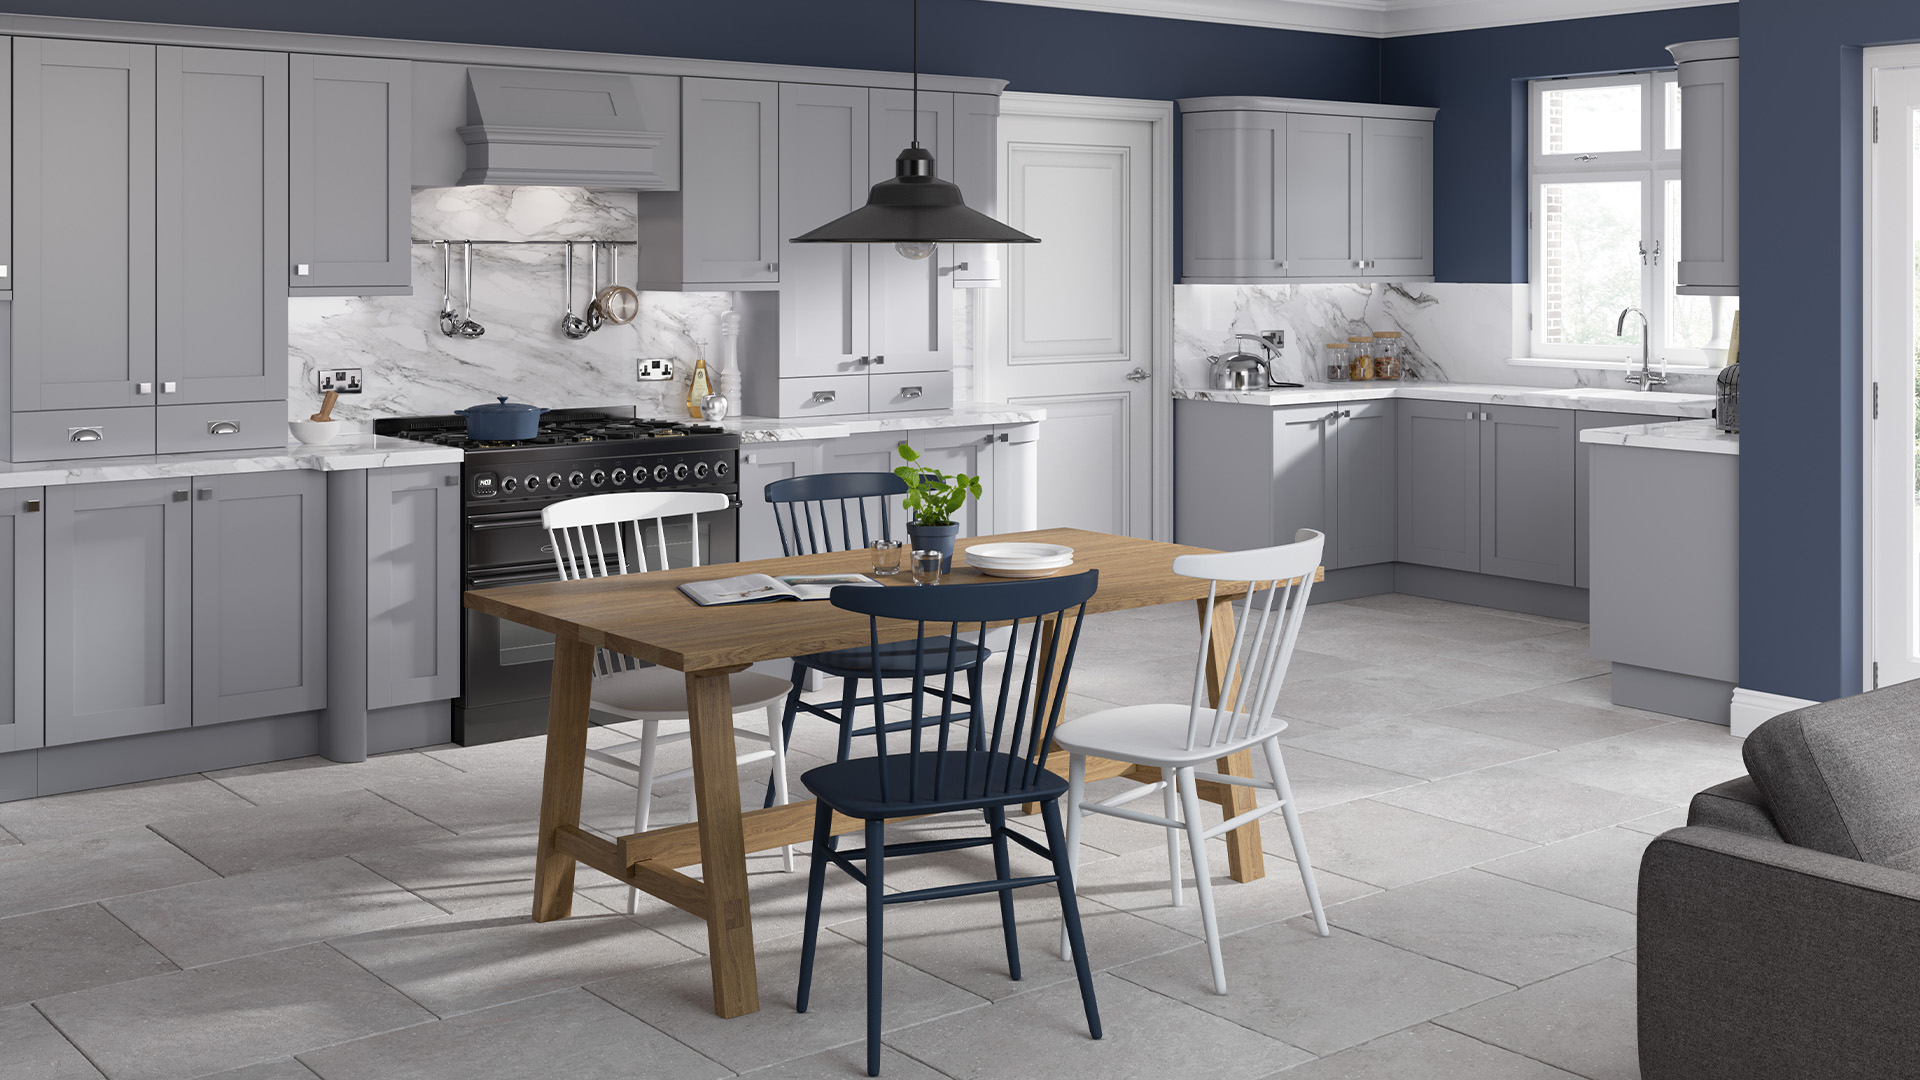 Signature smooth dust grey kitchens providing a sleek and uniform finish for an understated kitchens aesthetic